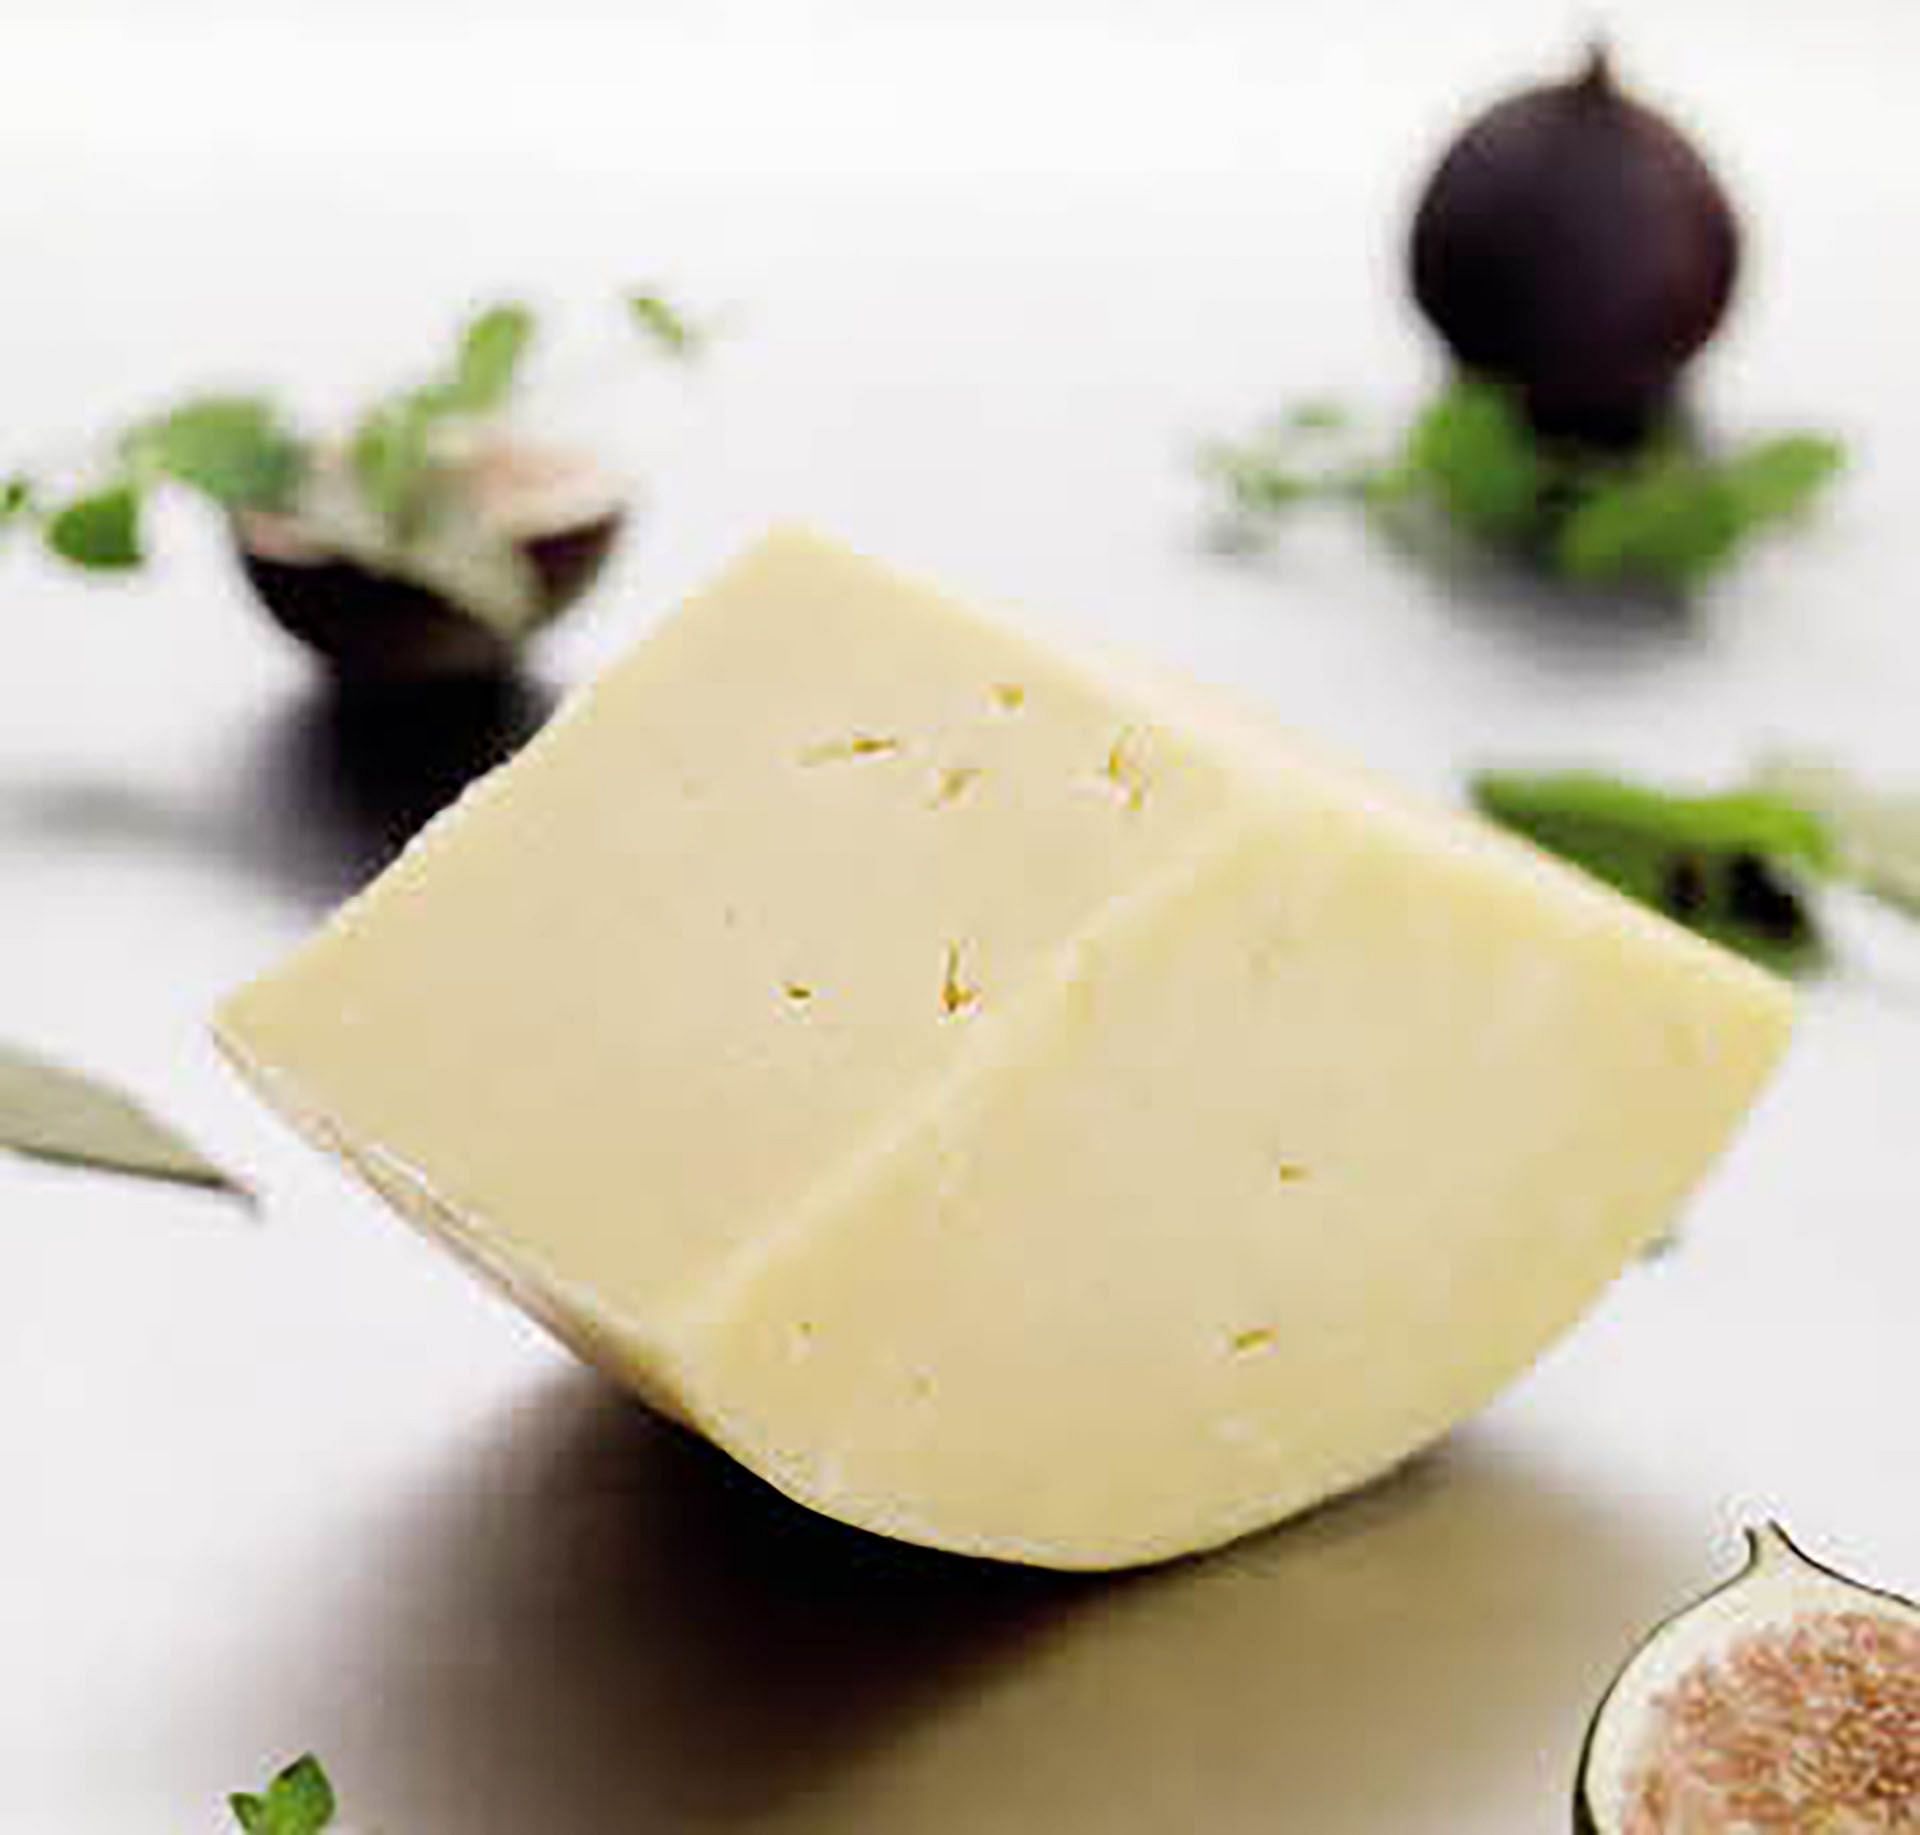 White Cheddar Cheese (Image via Openverse)